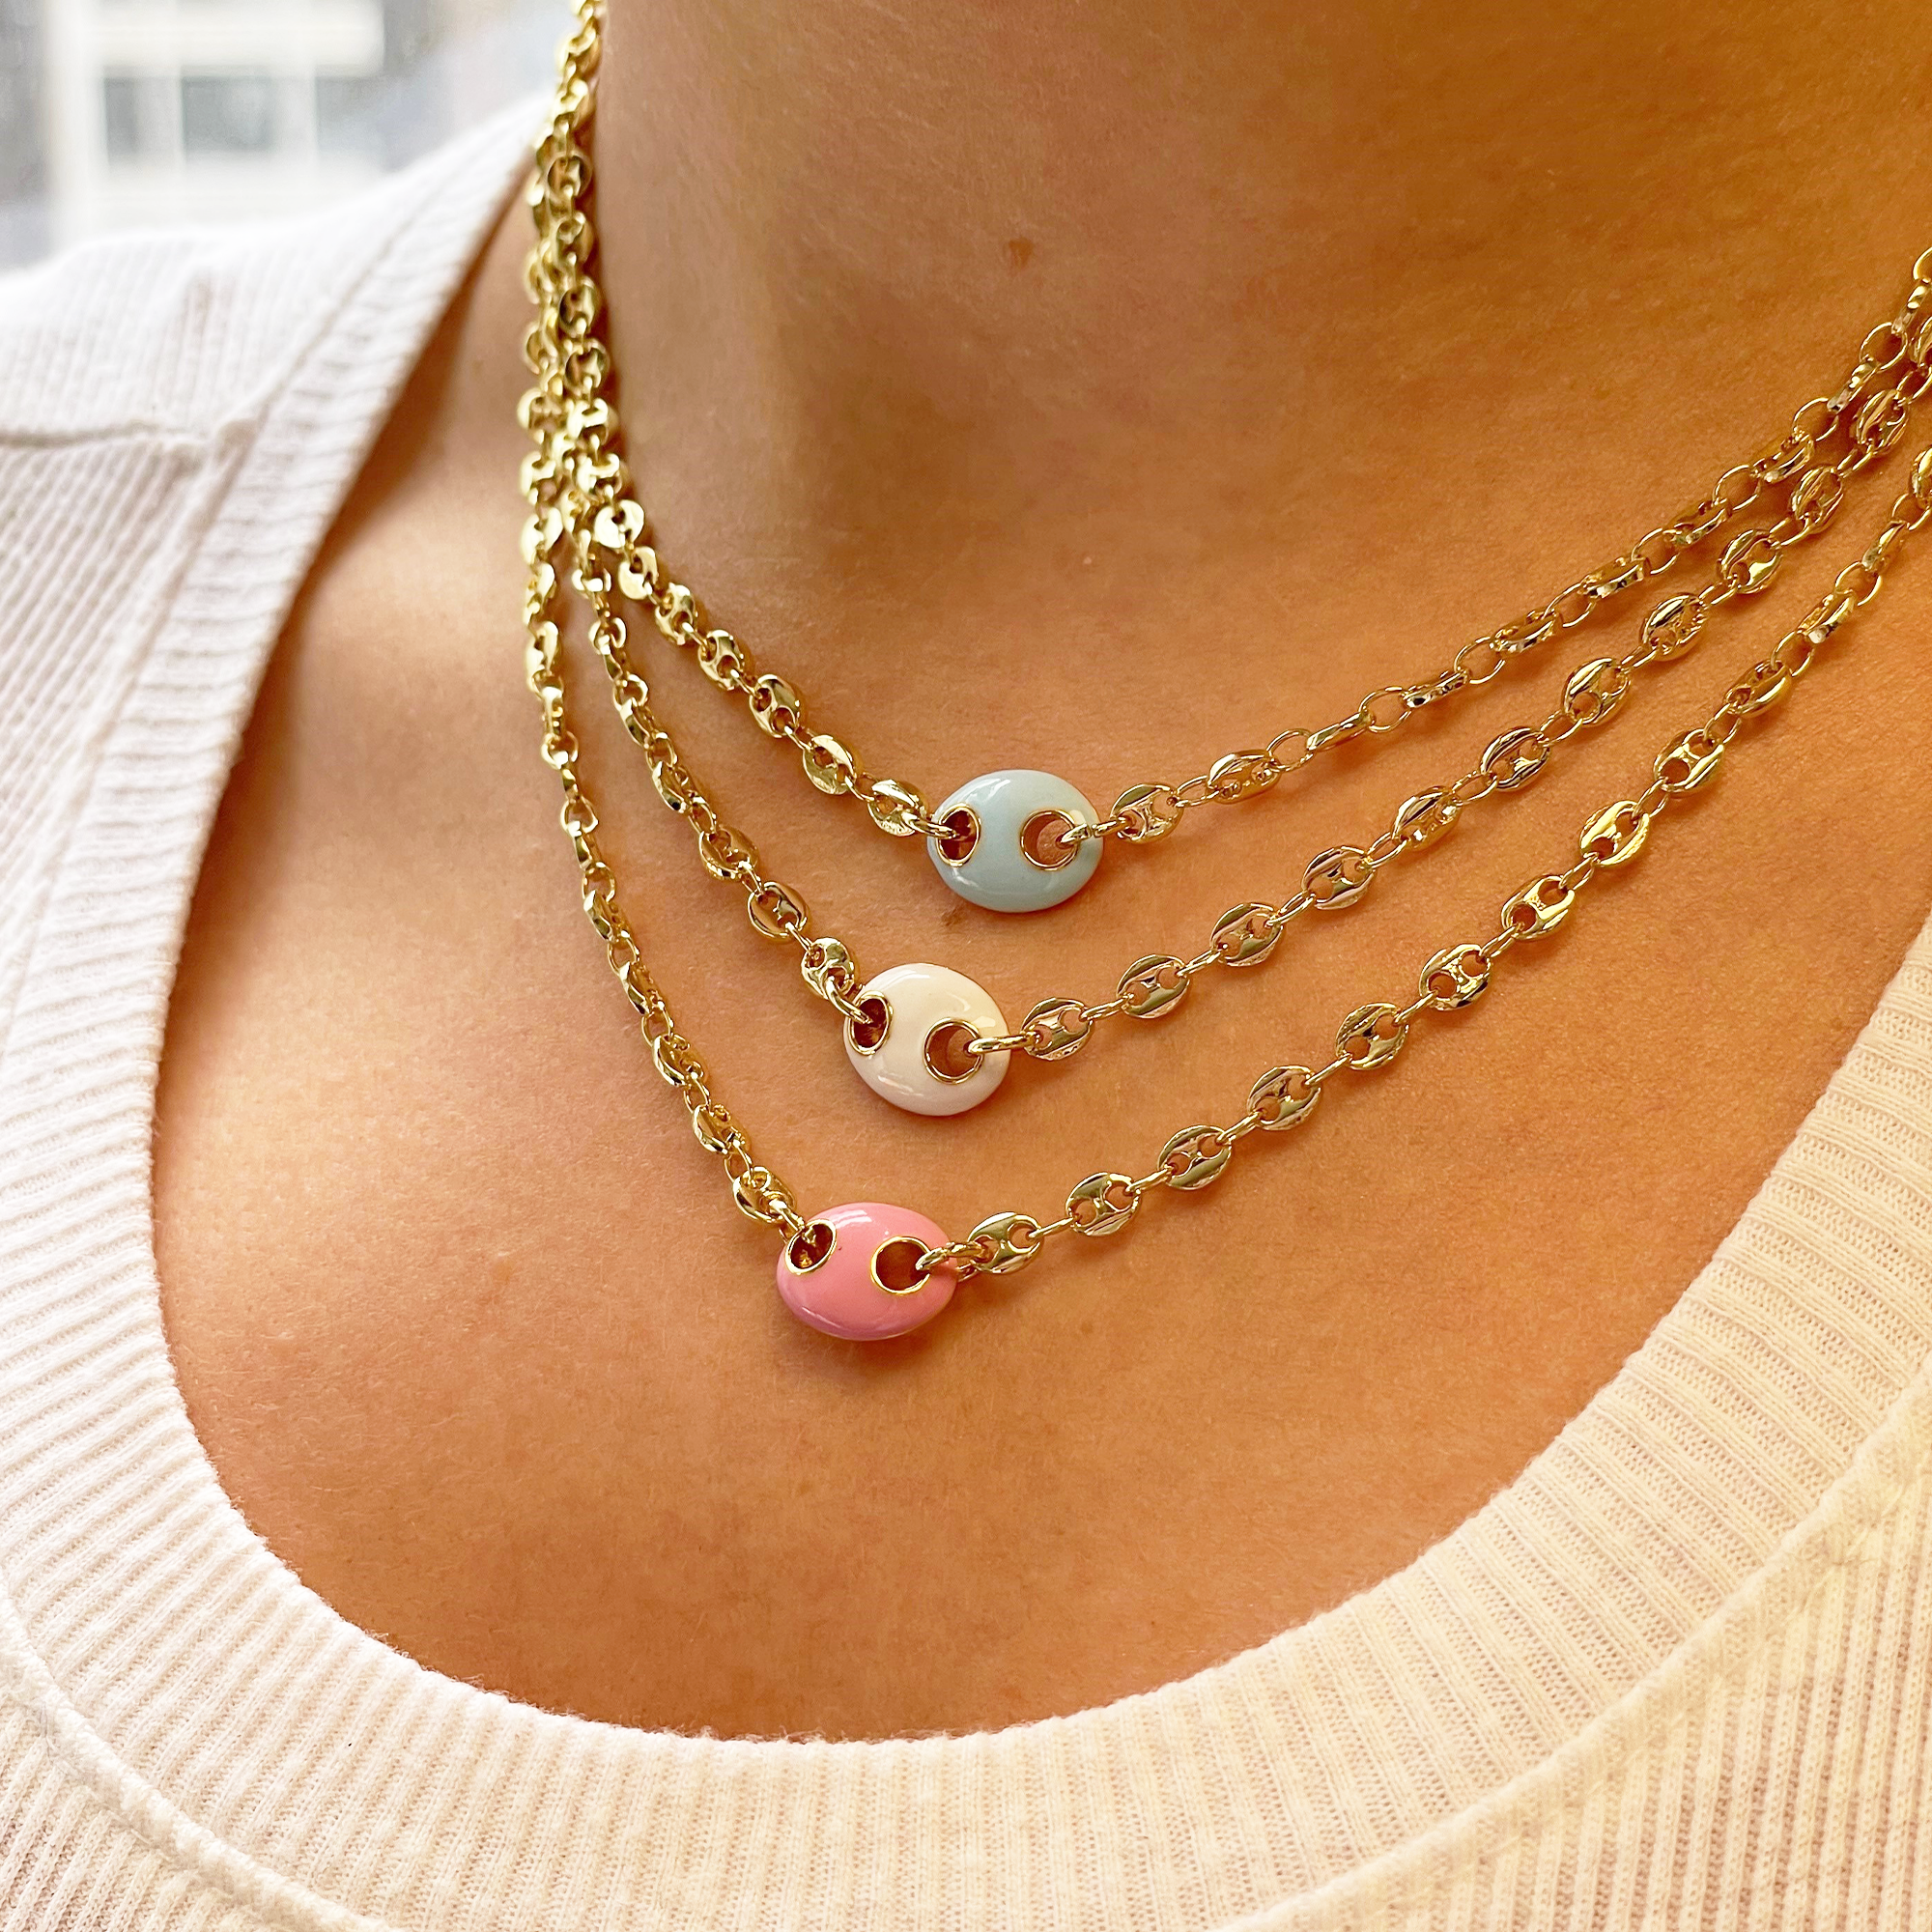 THE PINK ENAMEL MARINER CHAIN NECKLACE